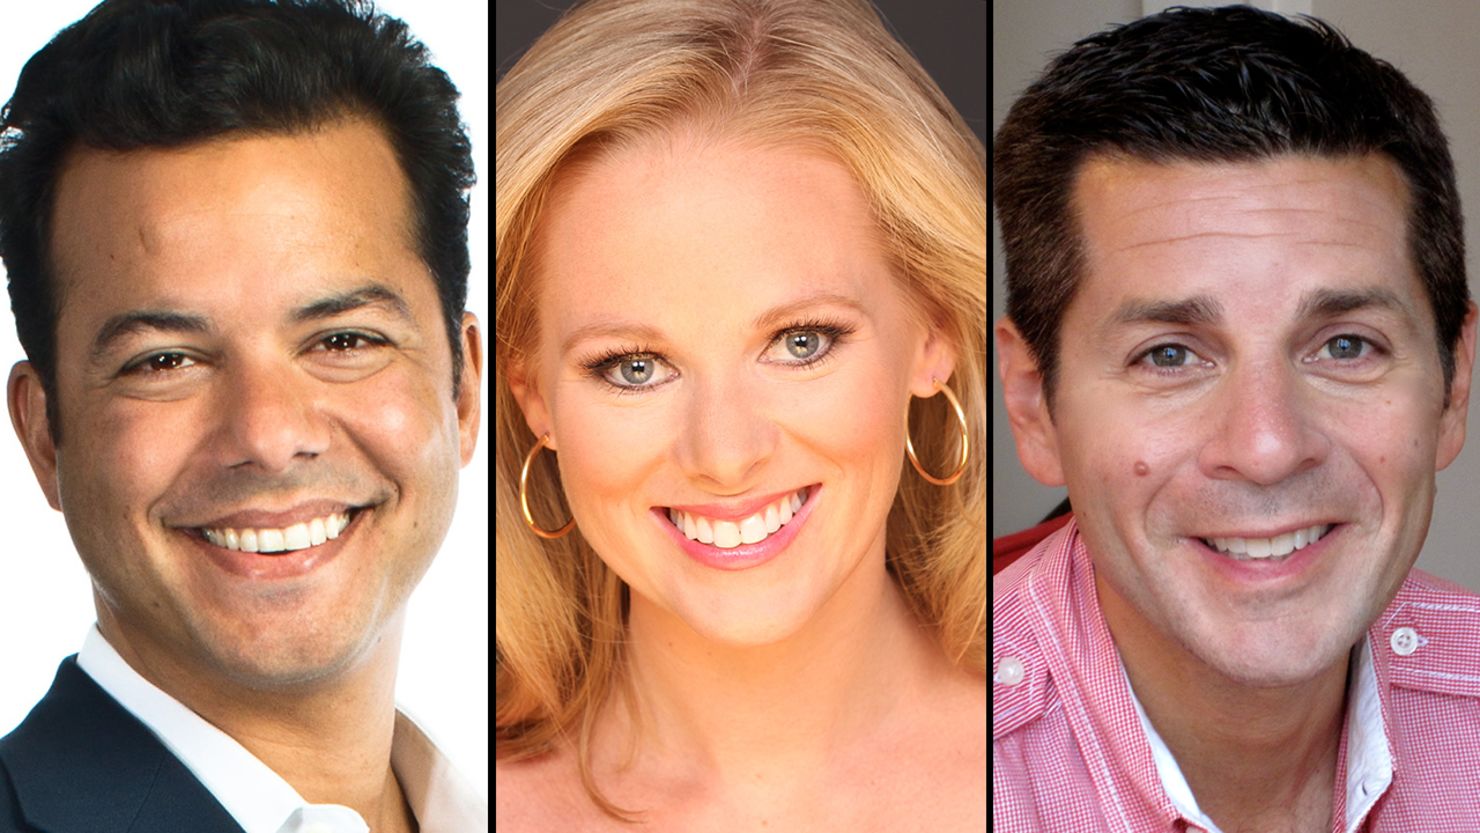 Your hosts for CNN's weekly podcast "The Big Three," from left: John Avlon, Margaret Hoover and Dean Obeidallah.